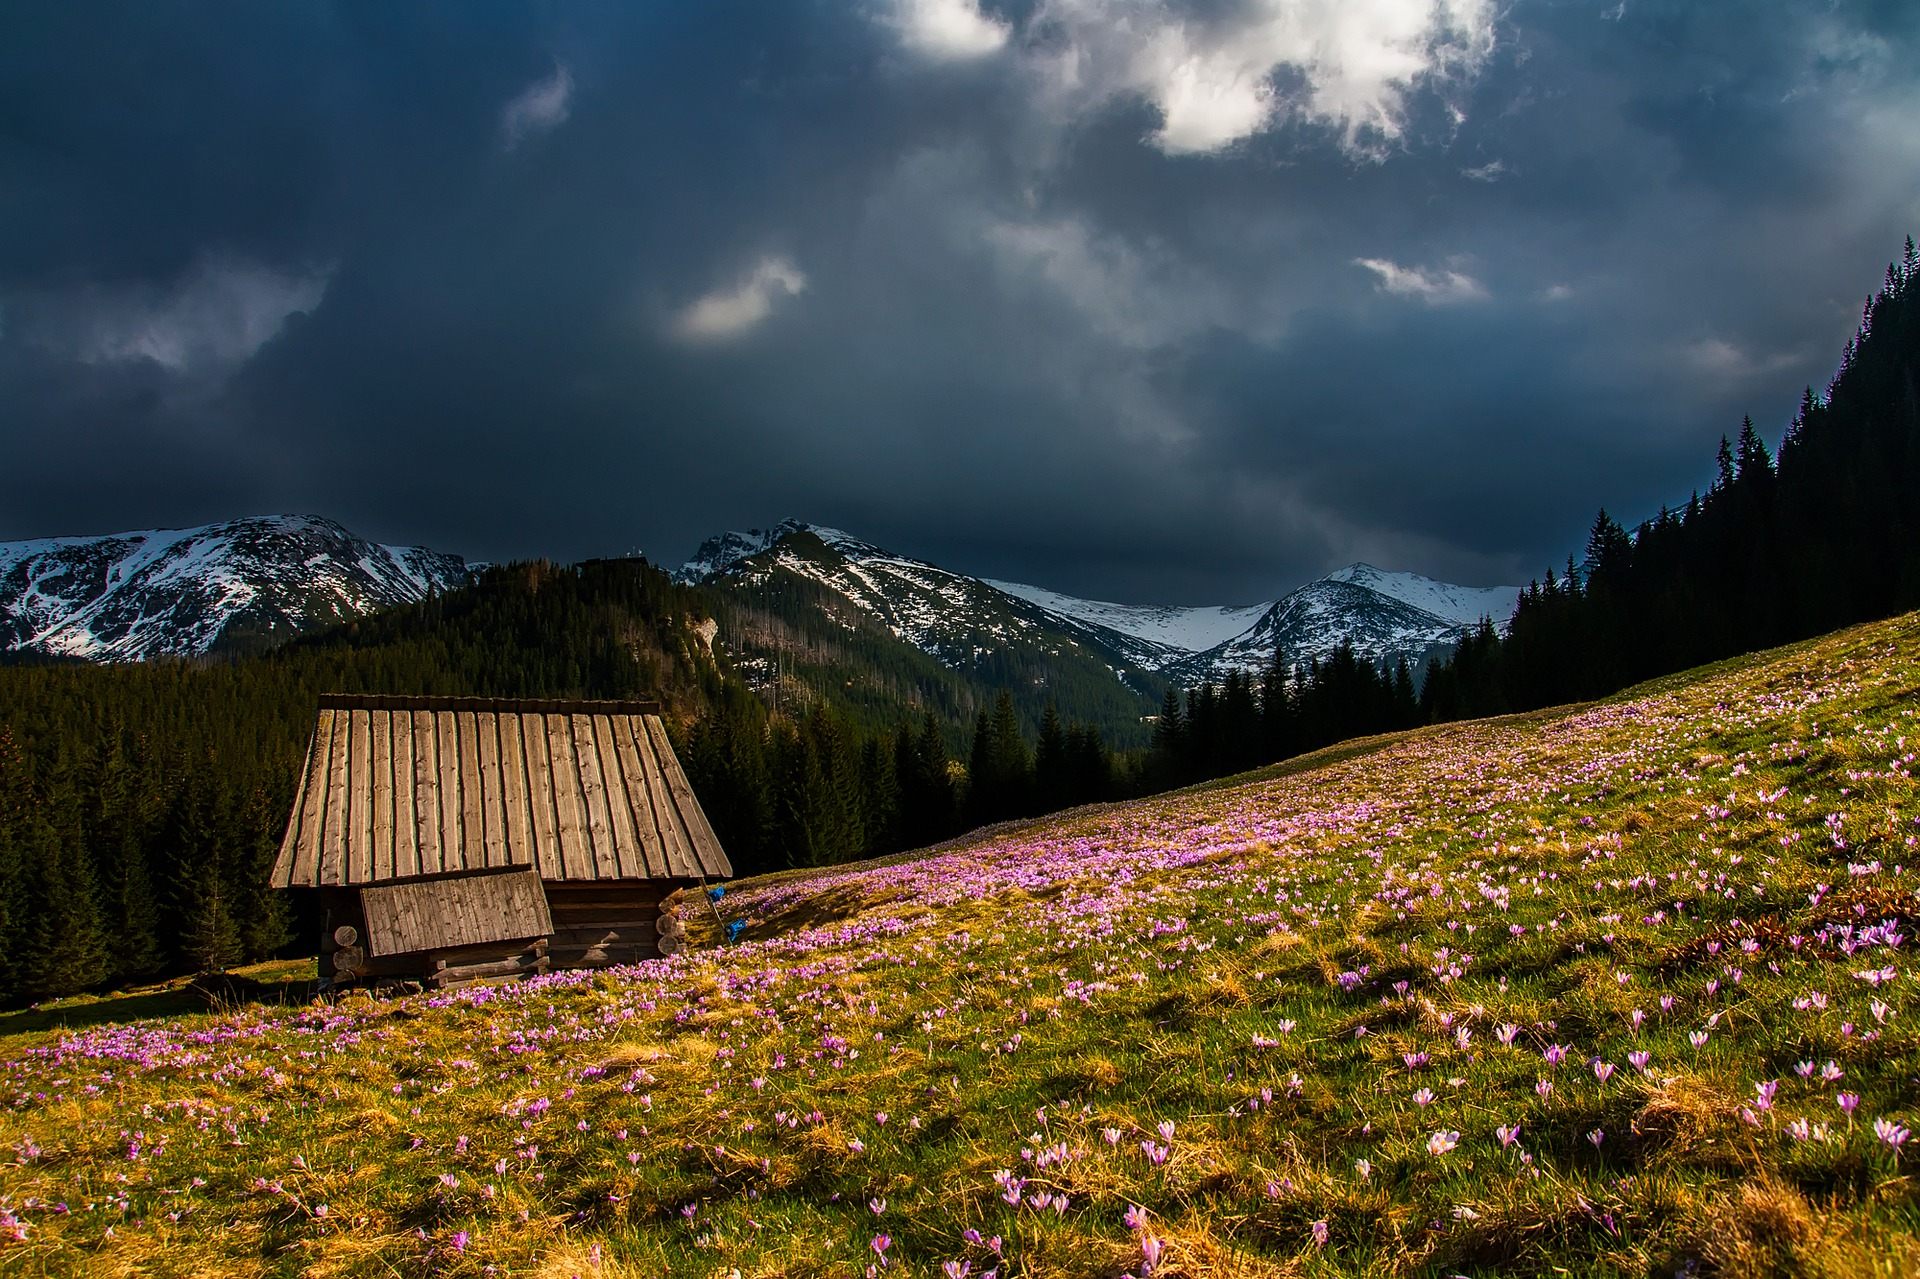 River Valley Of Flower Hd Wallpaper With Natural View - Mountain Hut Rustic  - 1920x1279 Wallpaper 